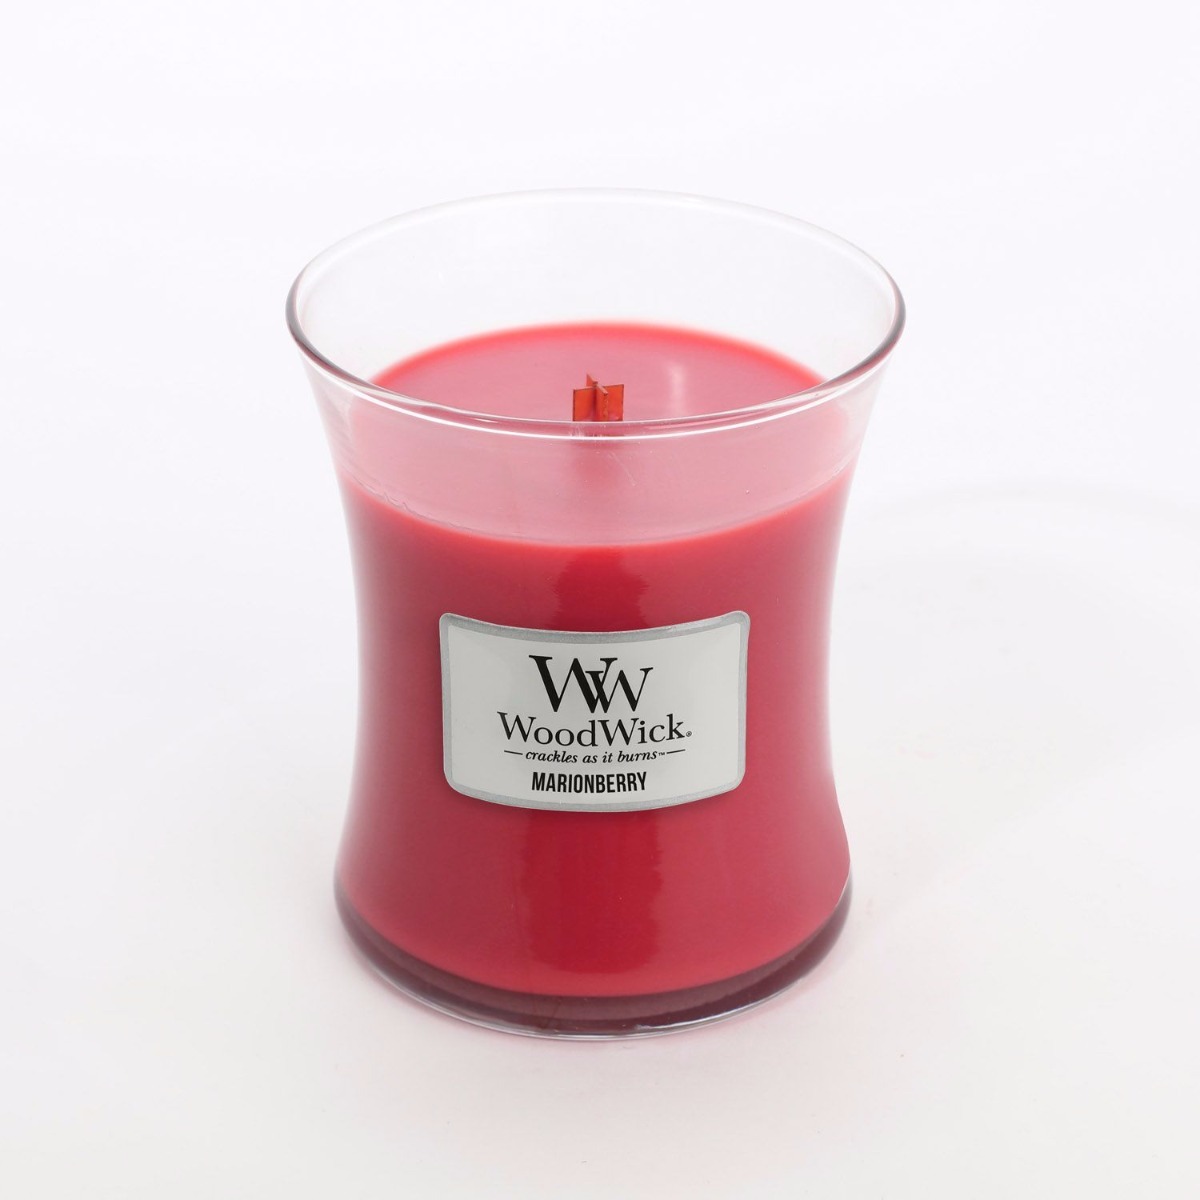 Woodwick Marionberry